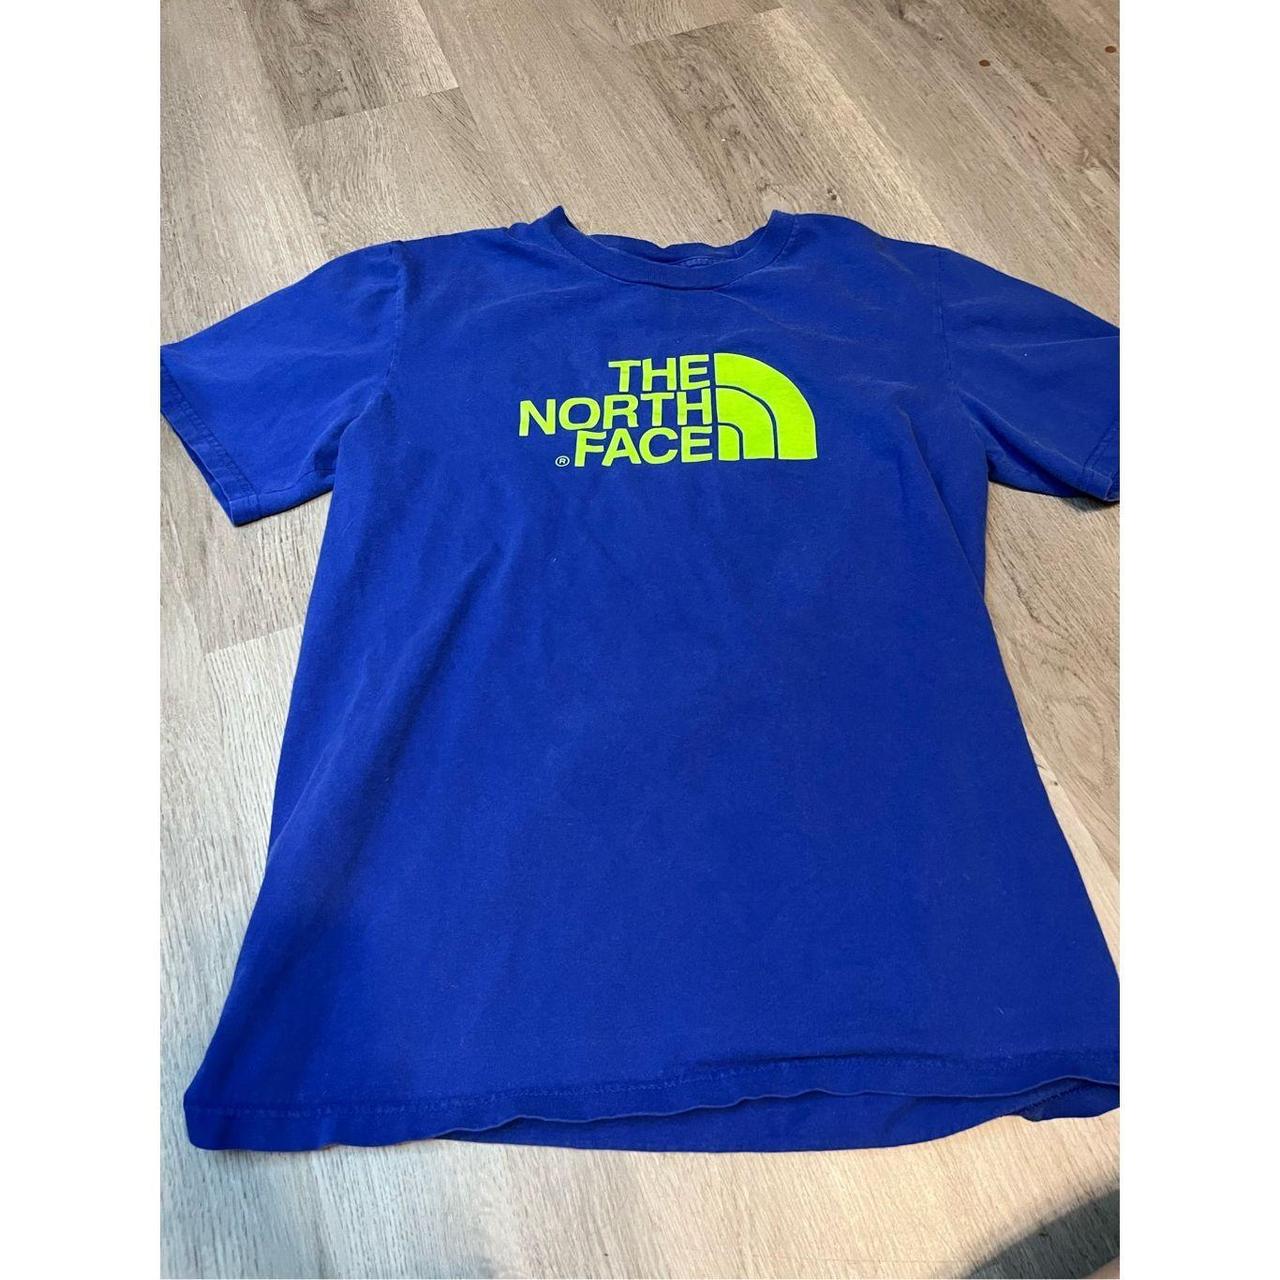 The North Face Men's Shirt The North Face Men's - Depop